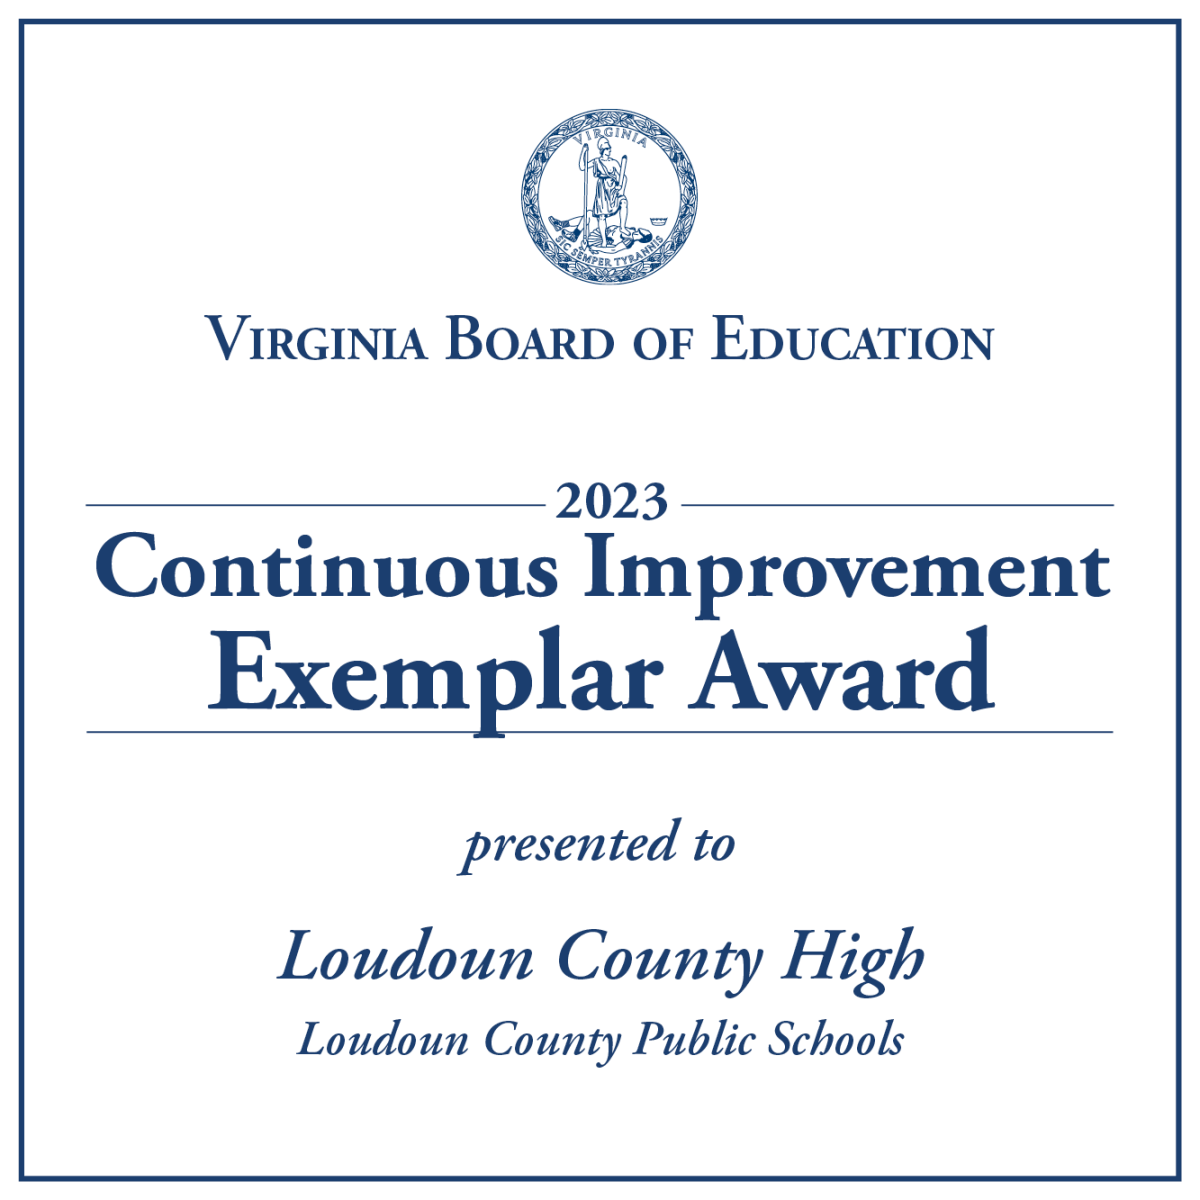 VA Dept. of Ed. 2023 Continuous improvement Exemplar Award. Award has been received in school years in the past, and presently in 2023.